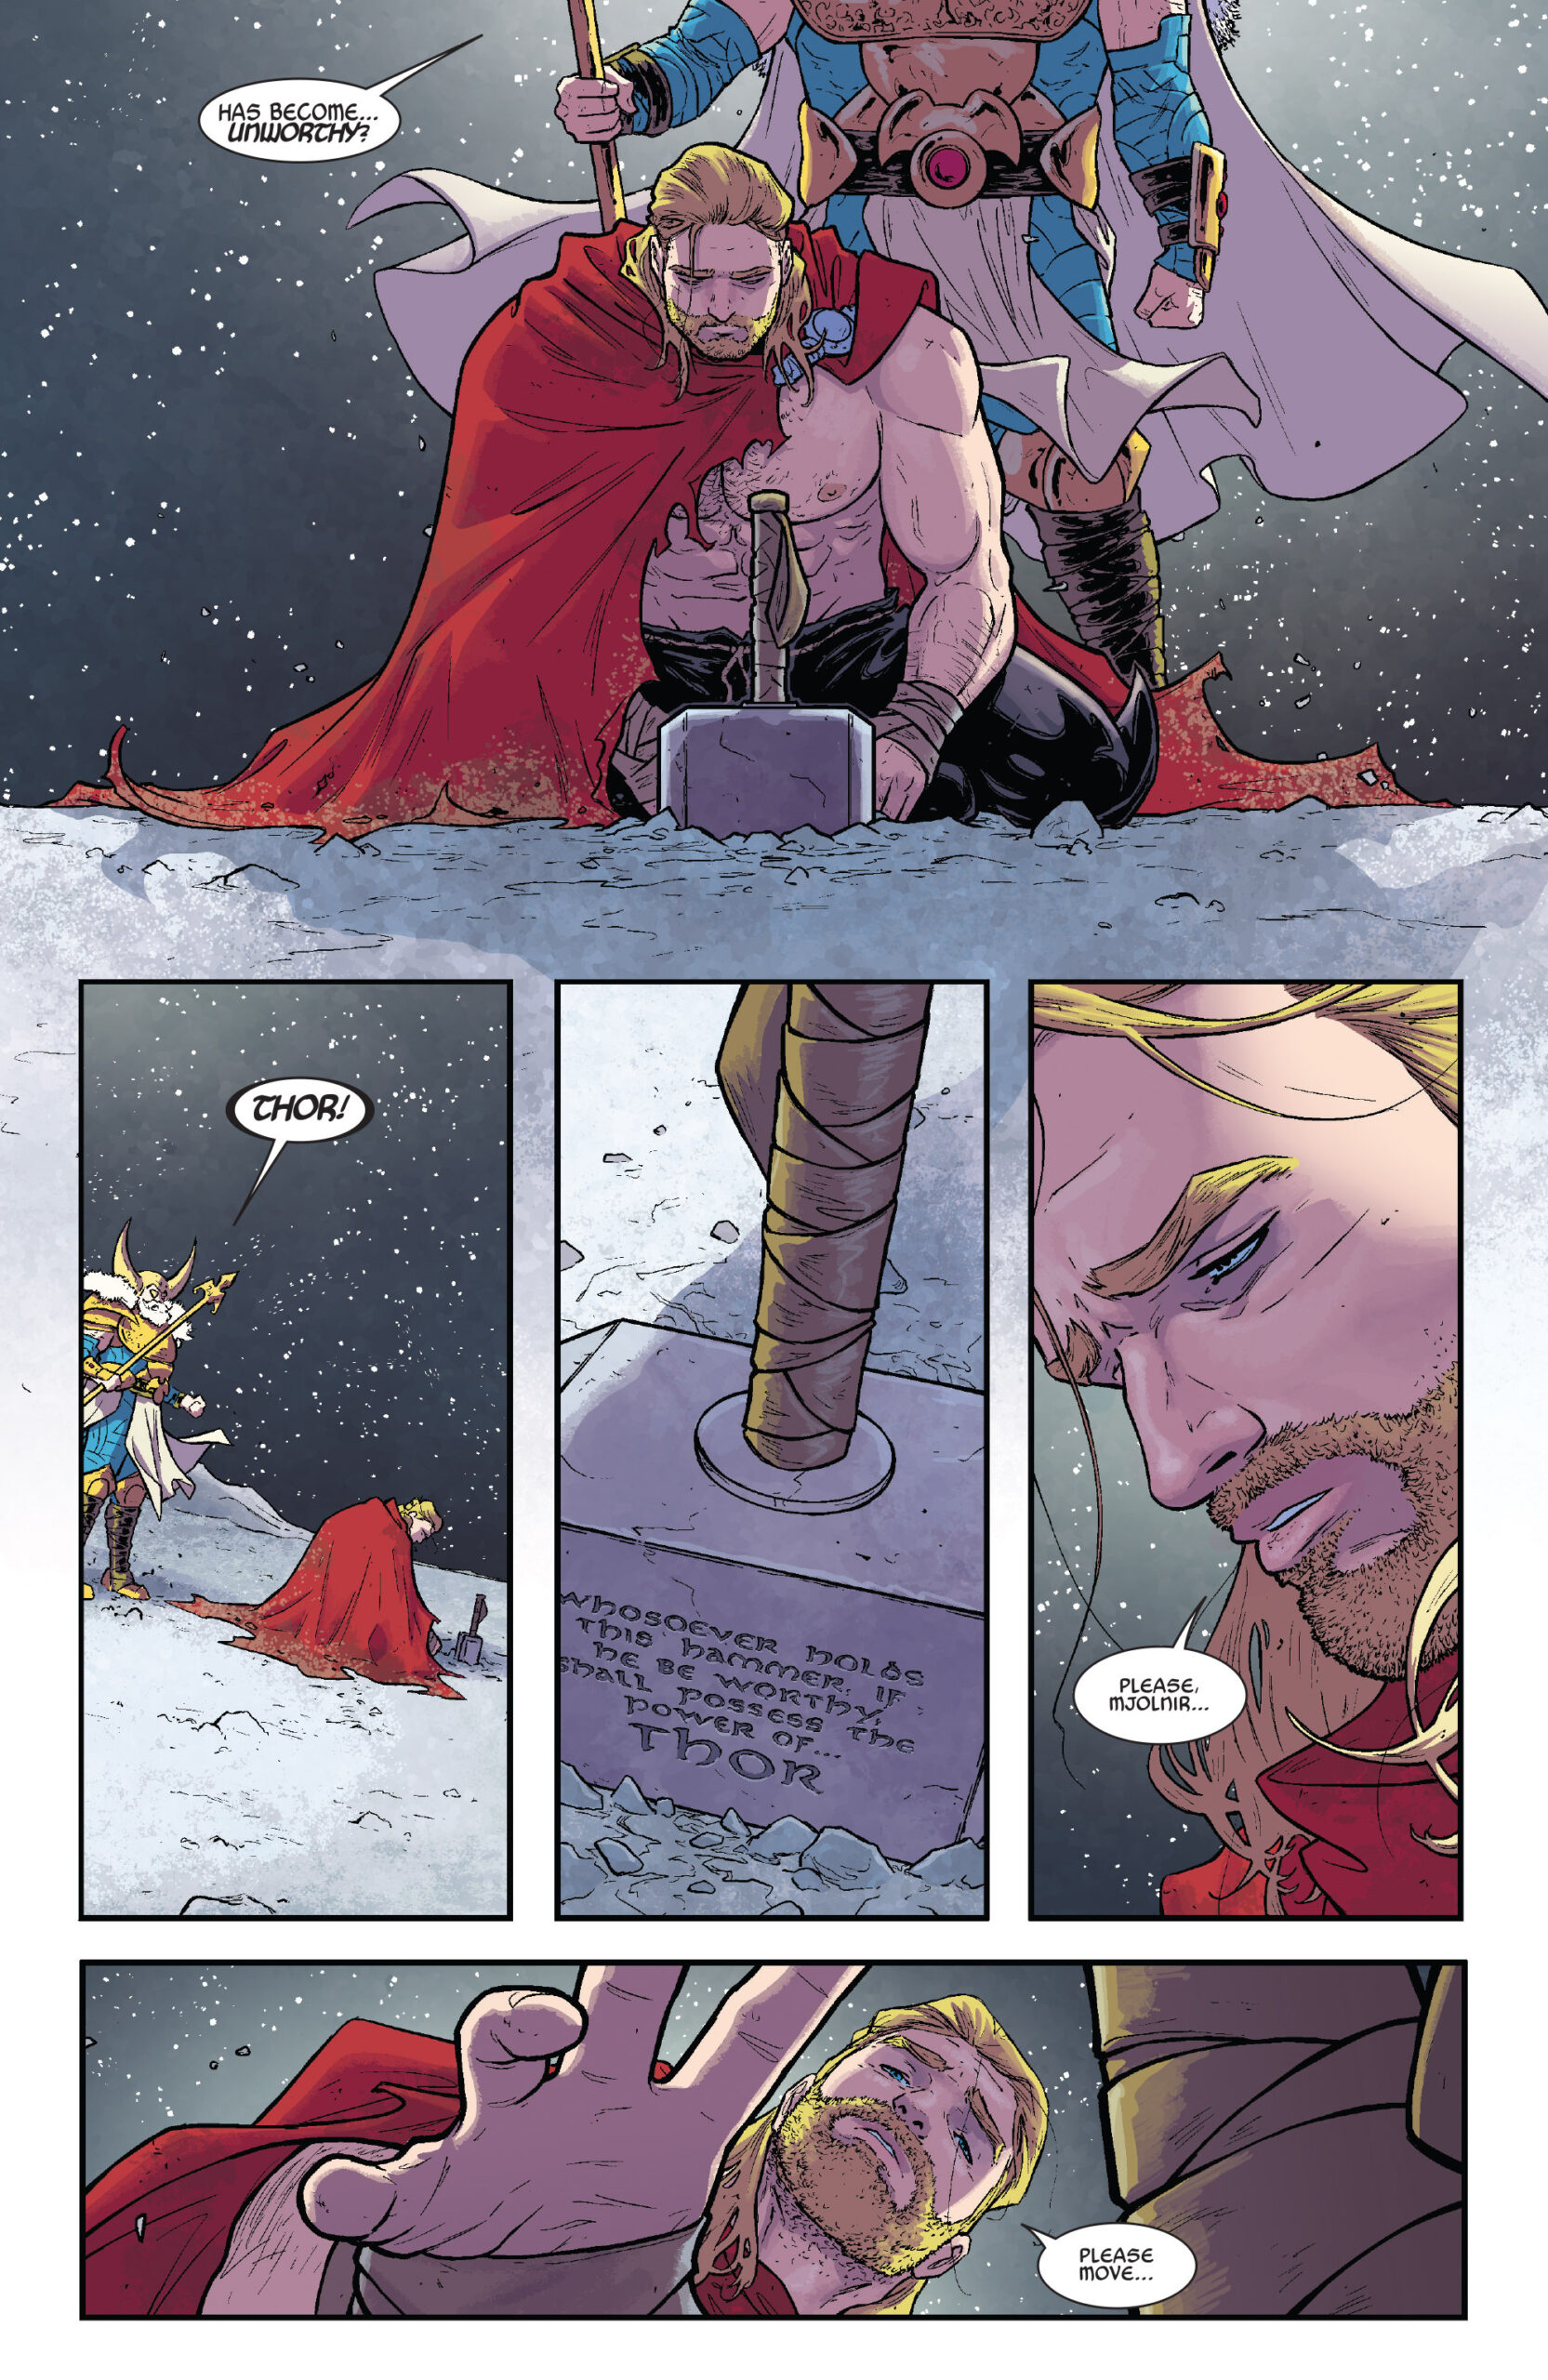 Thor struggles with Nick Fury's recent revelation in Thor Vol. 4 #1 "If He Be Worthy" (2014), Marvel Comics. Words by Jason Aaron, art by Russell Dauterman, Matthew Wilson, and Joe Sabino.